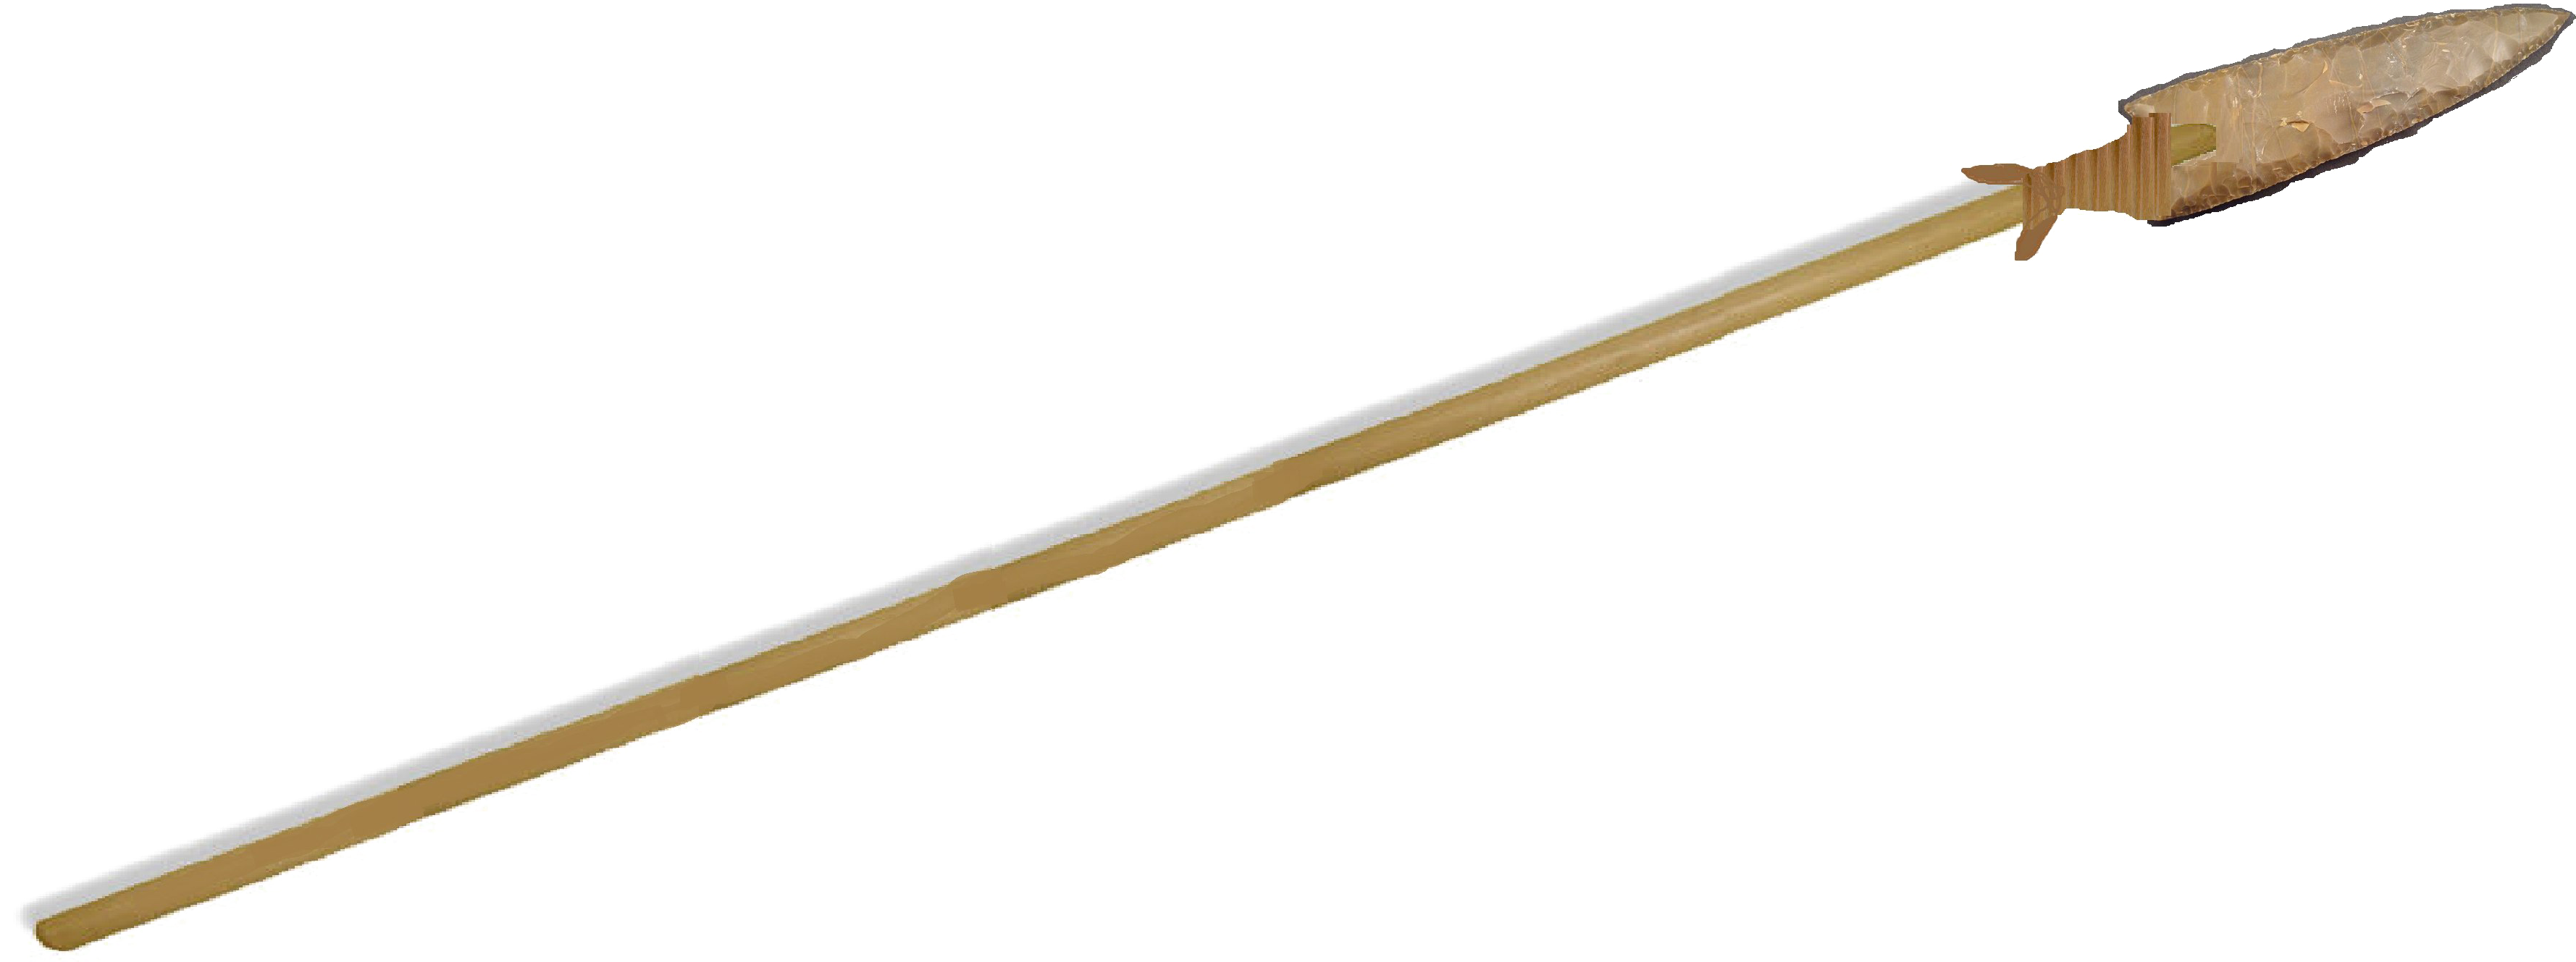 A Stick With A Black Background